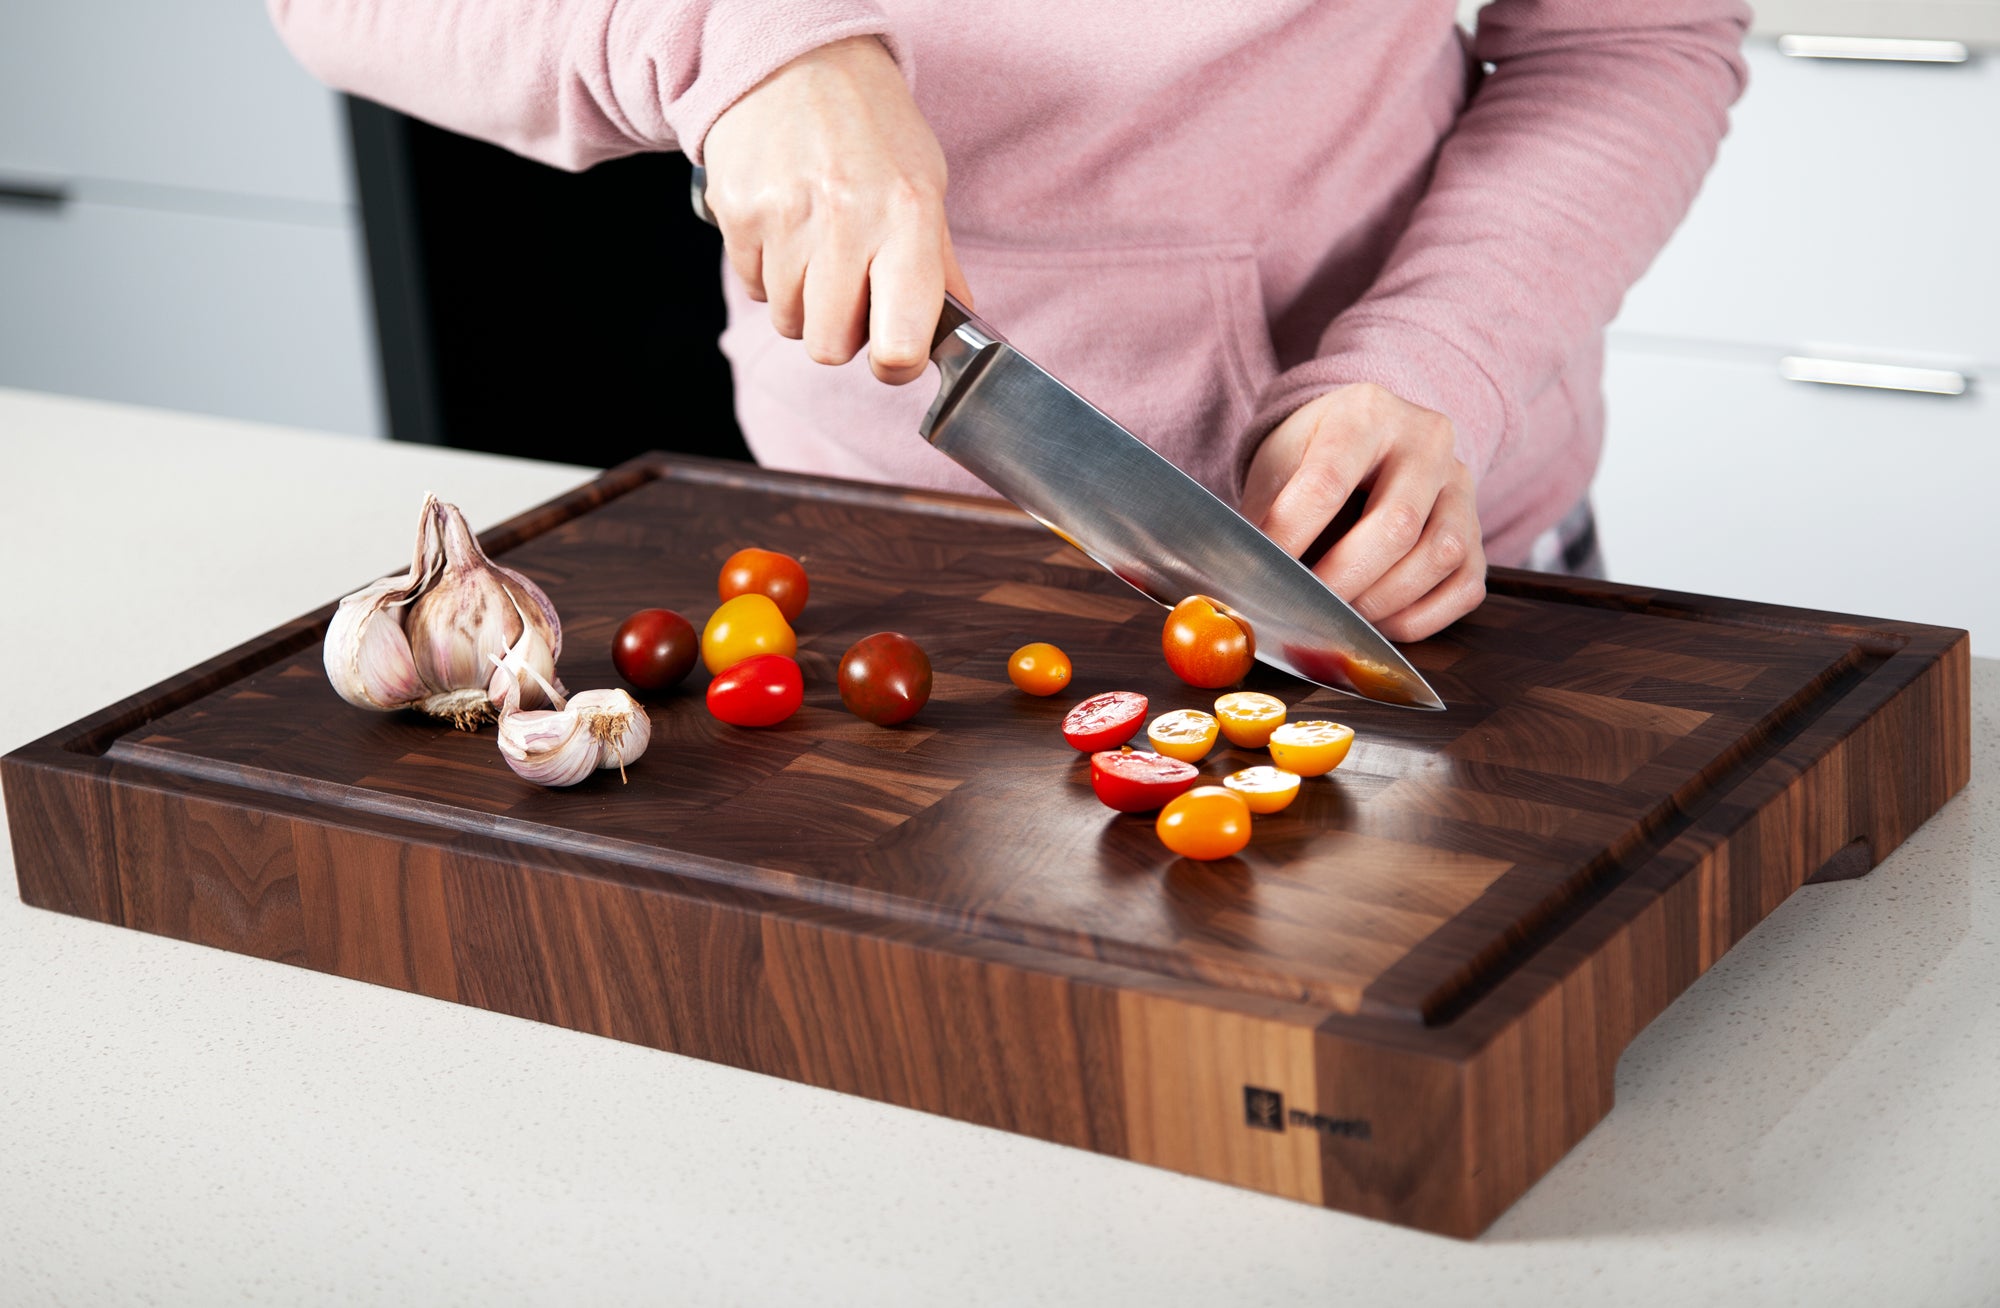 Best Wood for Cutting Boards